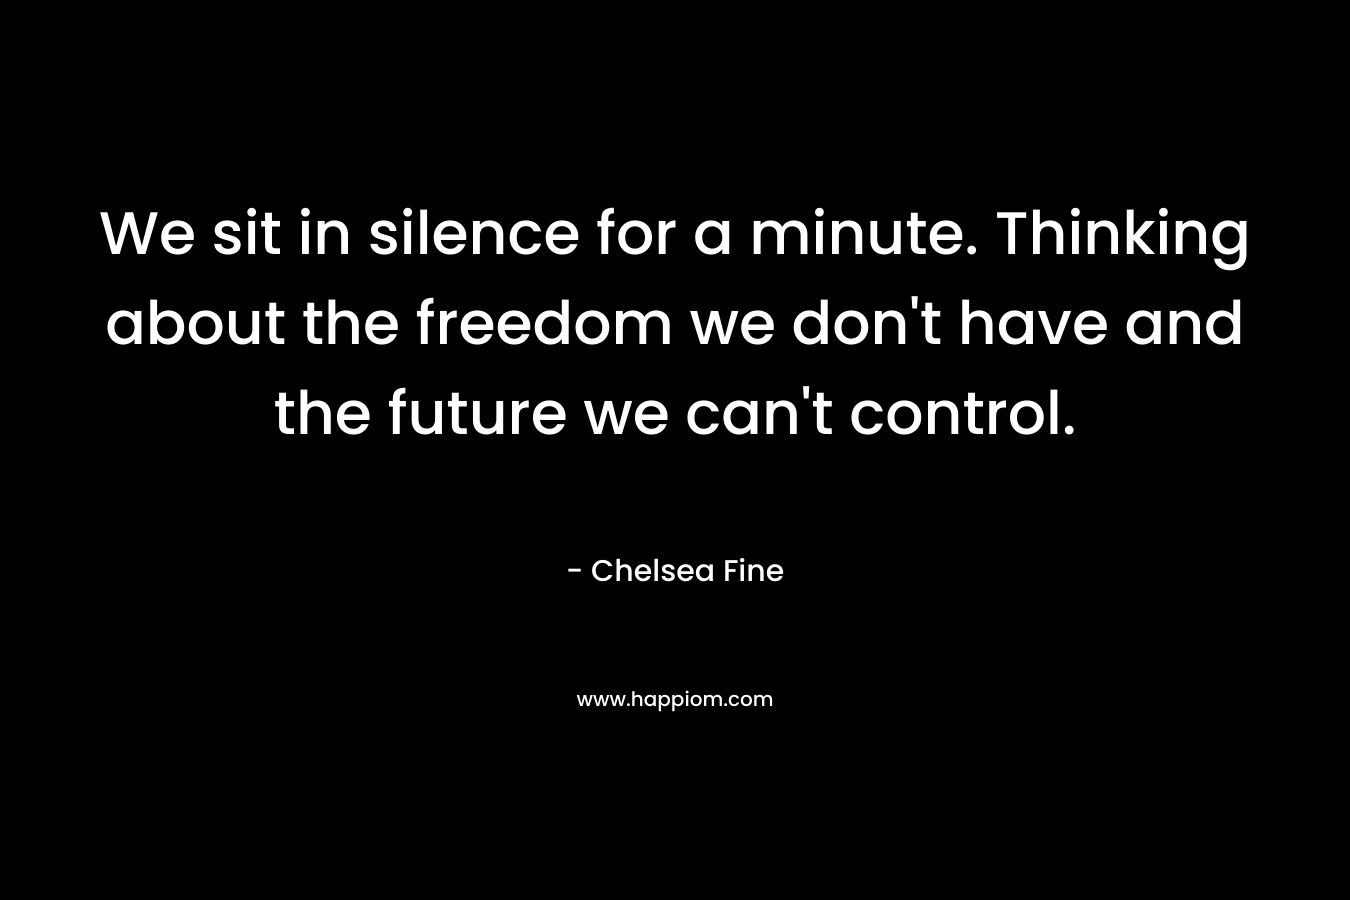 We sit in silence for a minute. Thinking about the freedom we don’t have and the future we can’t control. – Chelsea Fine